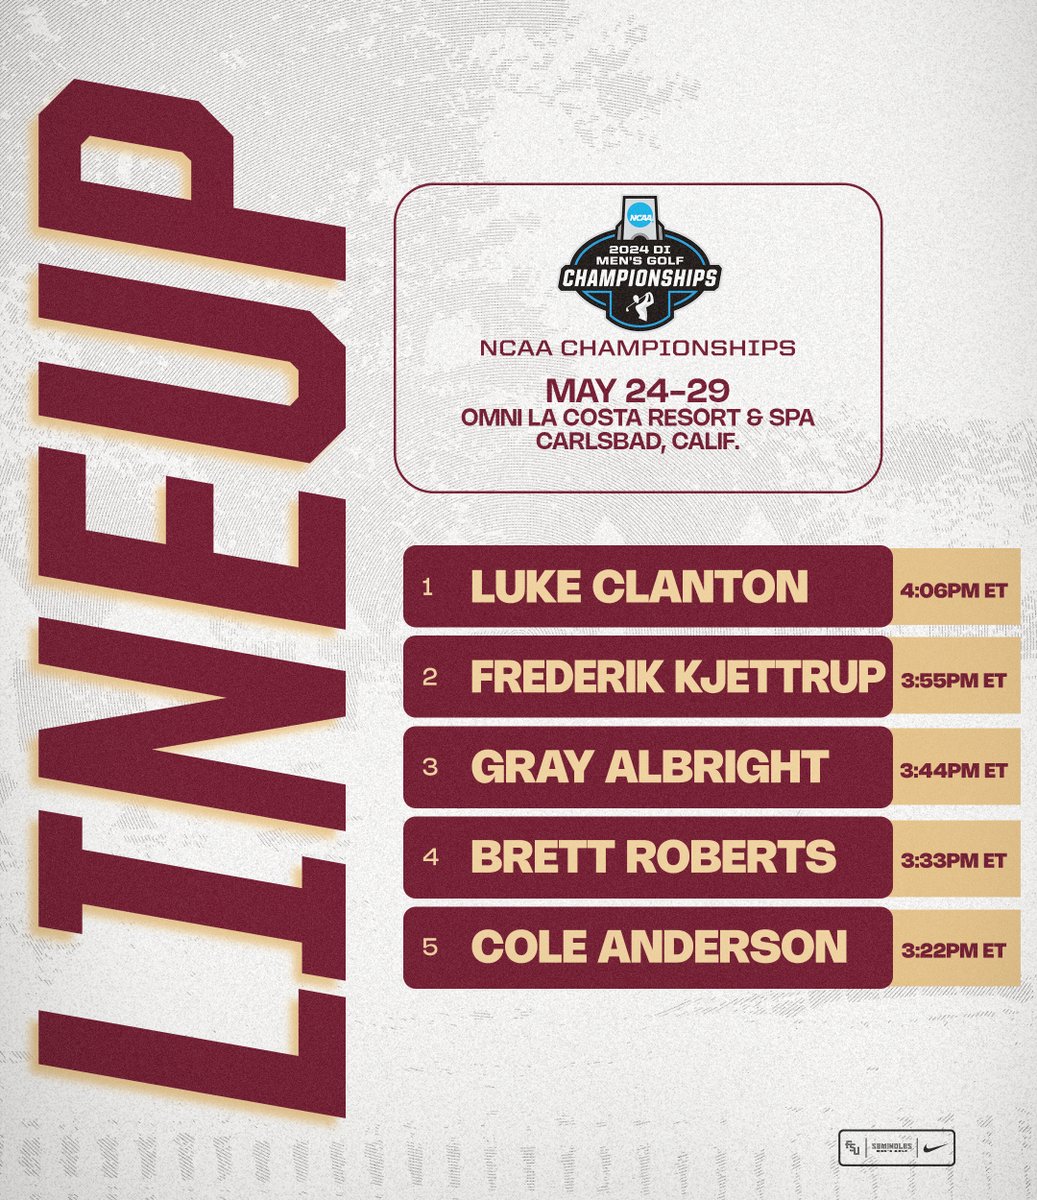 Every round is an 𝐨𝐩𝐩𝐨𝐫𝐭𝐮𝐧𝐢𝐭𝐲 The fifth-seeded men's golf team gets underway at the #NCAAGolf Championship on Friday! 🗓️ May 24-29 📍 Omni La Costa Resort & Spa | Carlsbad, Calif. 📊 results.golfstat.com/public/leaderb… #OneTribe | #GoNoles